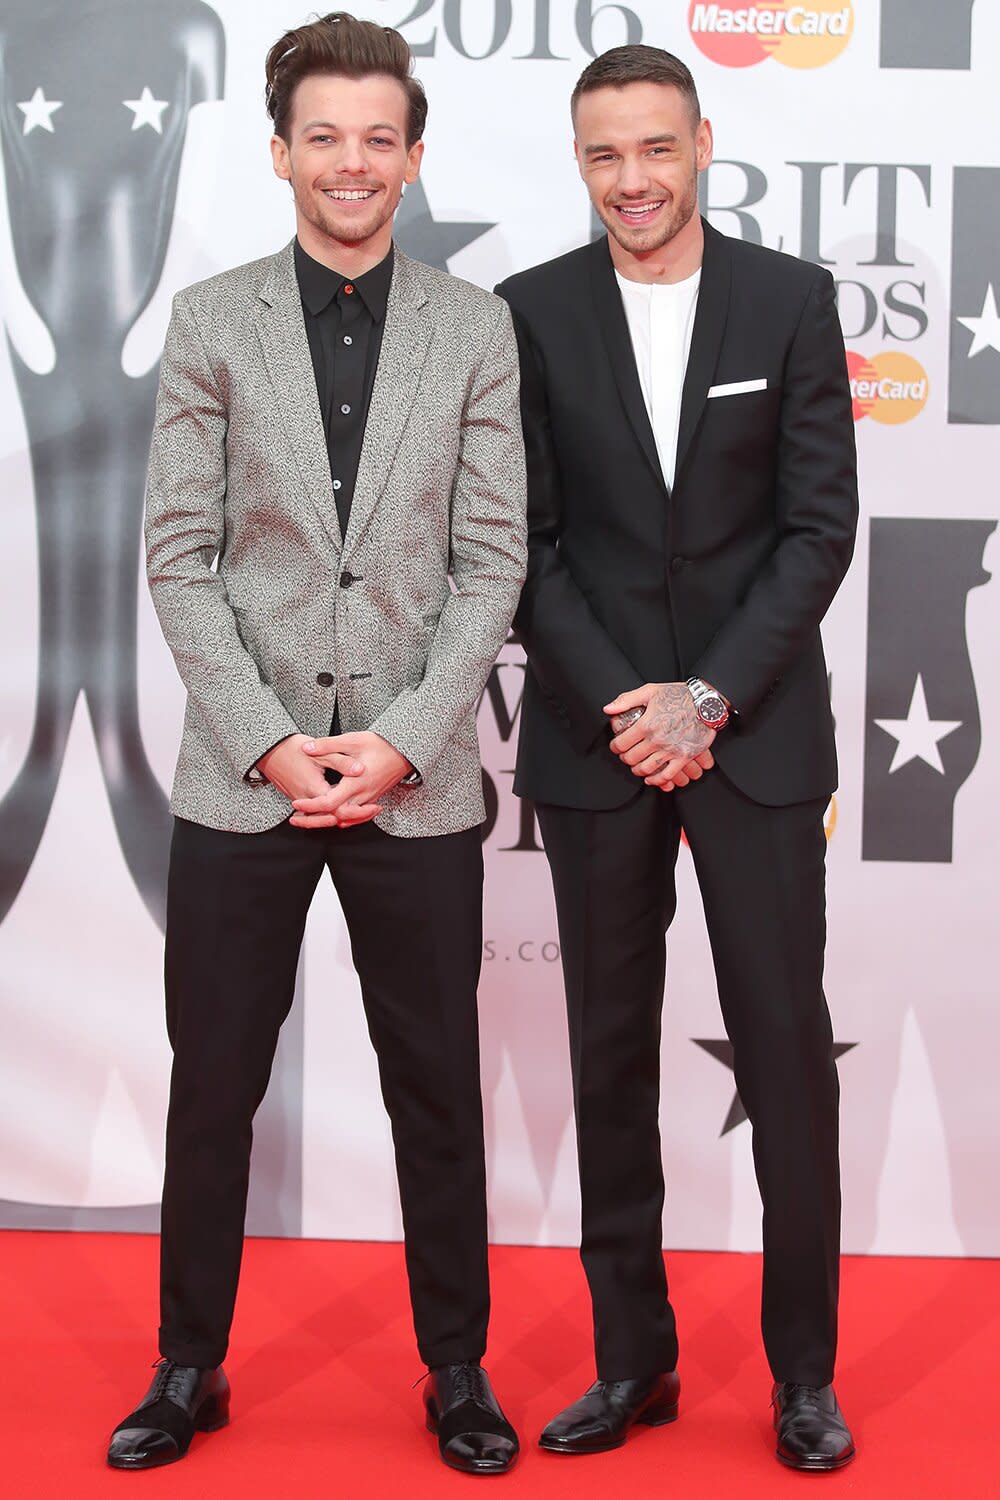 Louis Tomlinson and Liam Payne attend the BRIT Awards 2016 at The O2 Arena on February 24, 2016 in London, England.